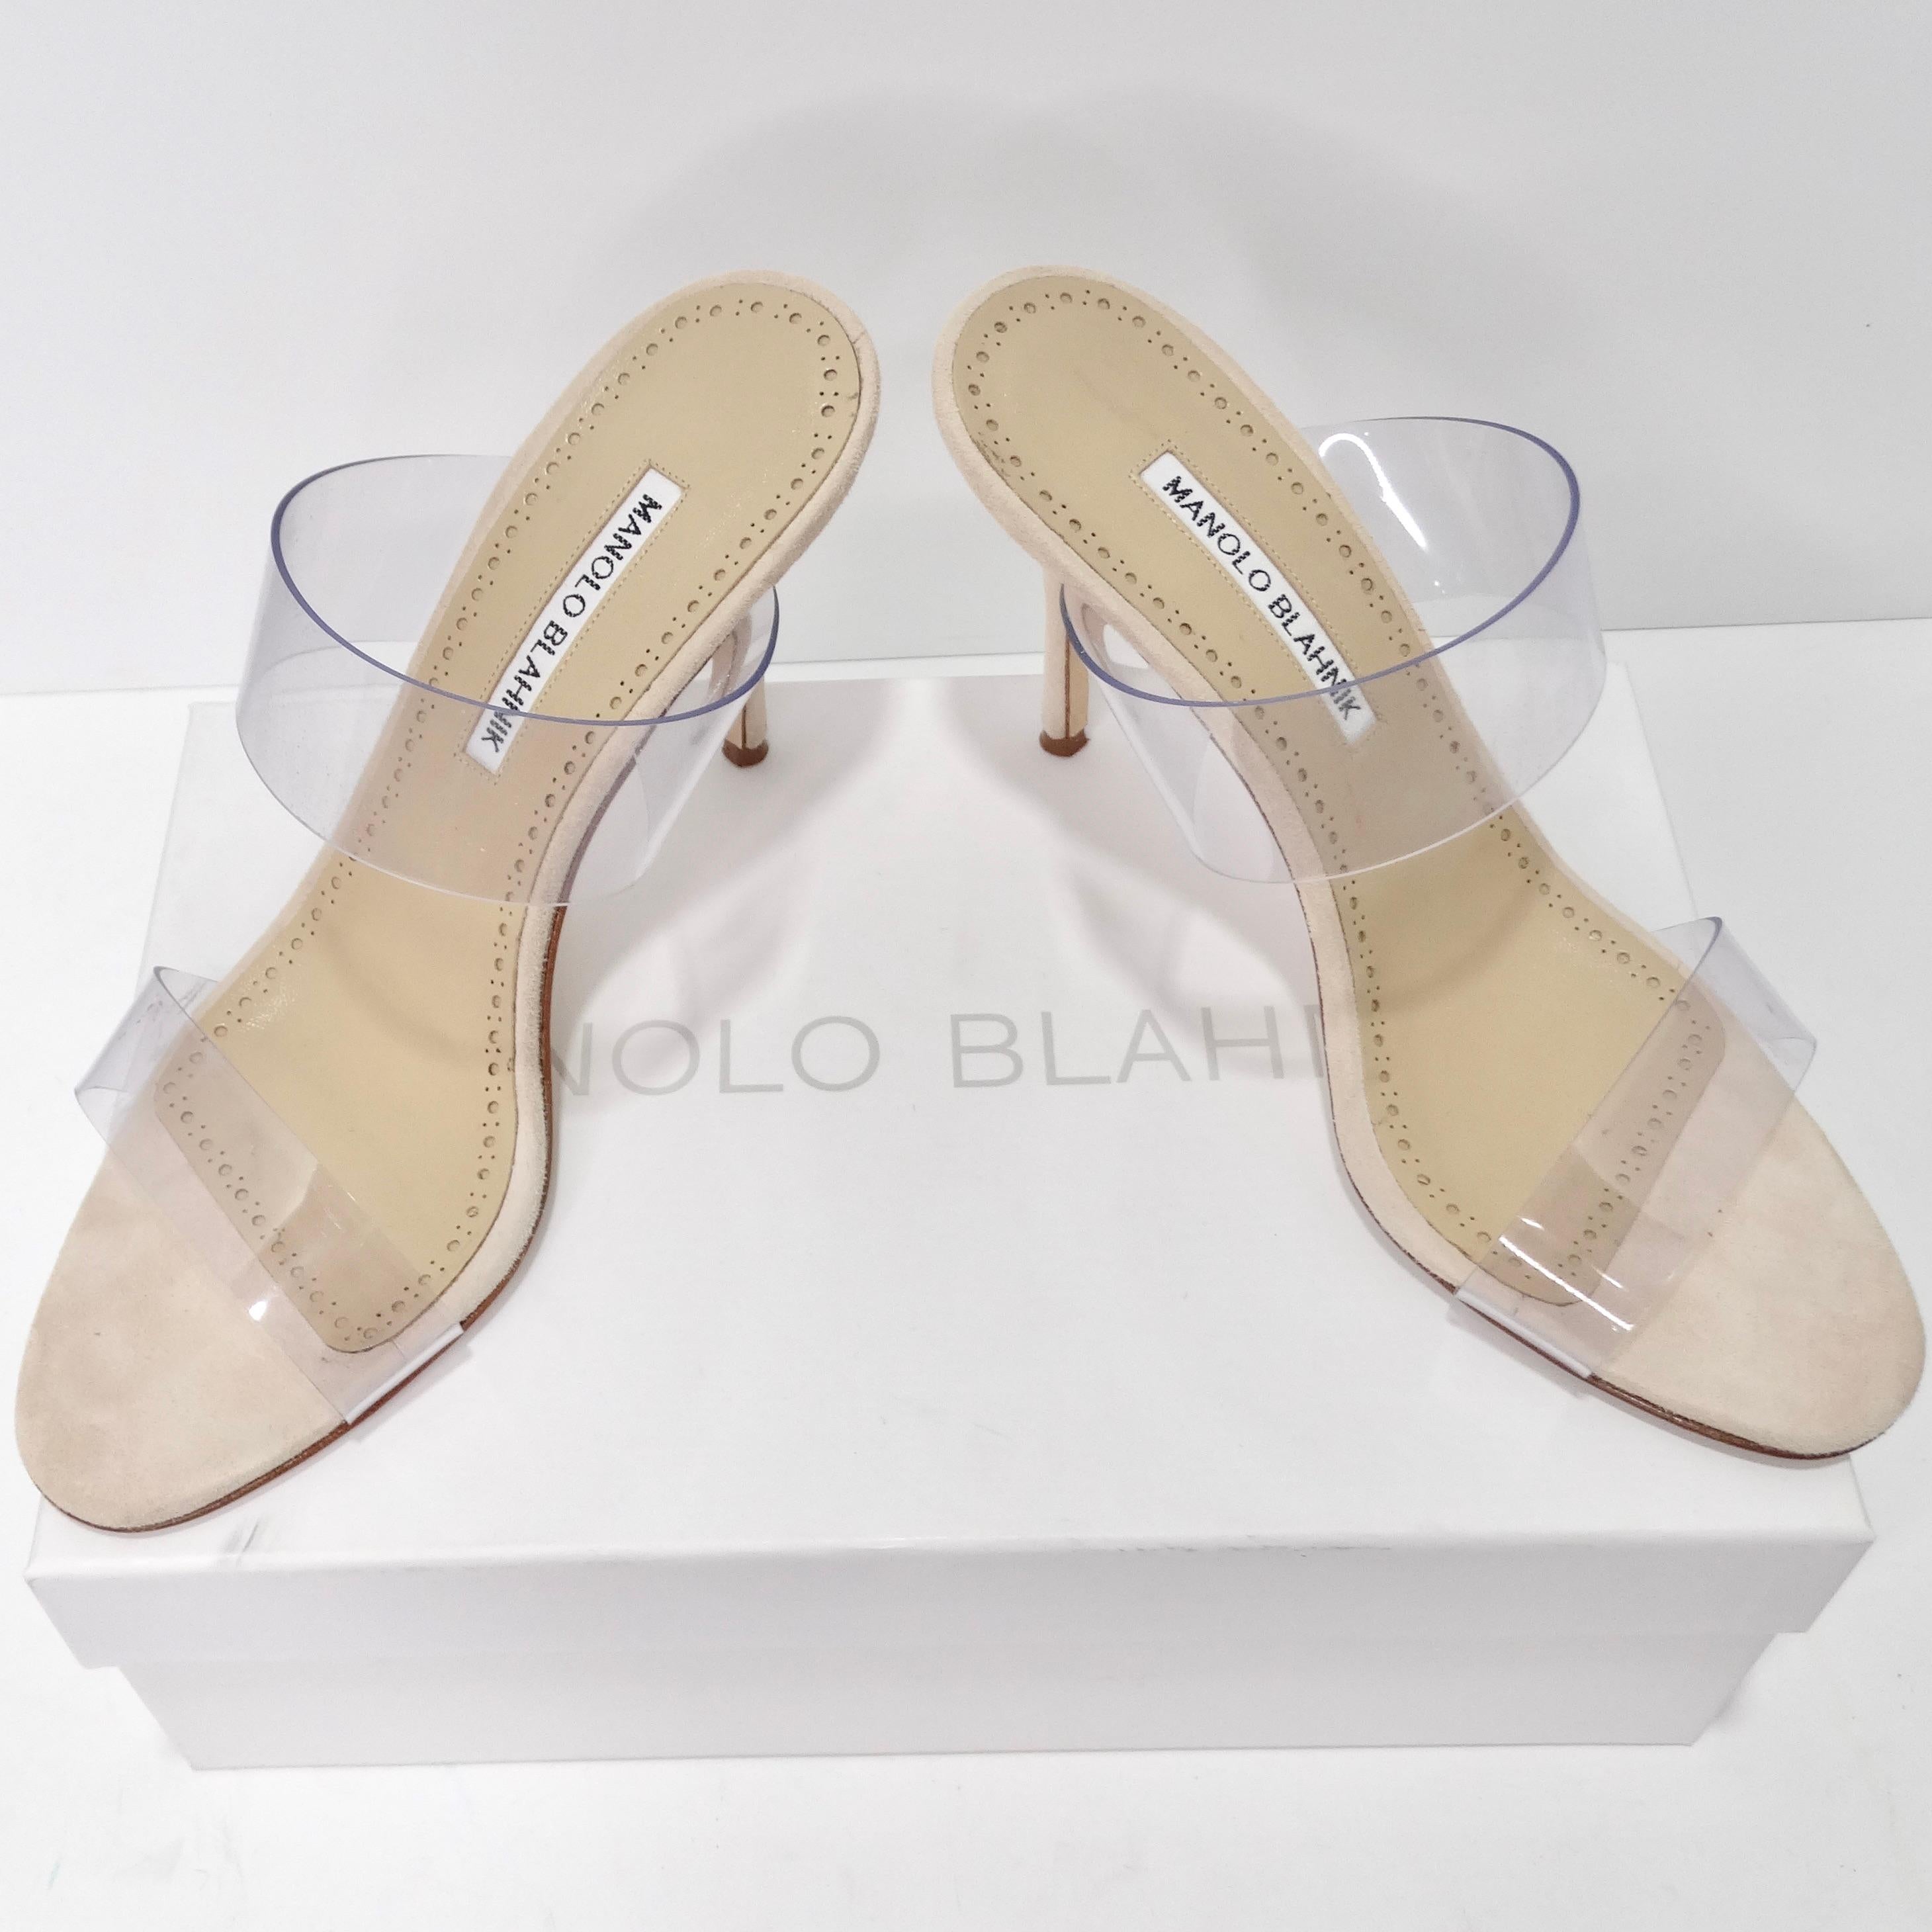 Introducing the Manolo Blahnik Scolto Clear ECO PVC Open Toe Mules, the ultimate versatile shoe choice for those who want to flaunt their pedicure and stay on-trend. These high-heeled mules embody contemporary elegance with their trendy mule style.